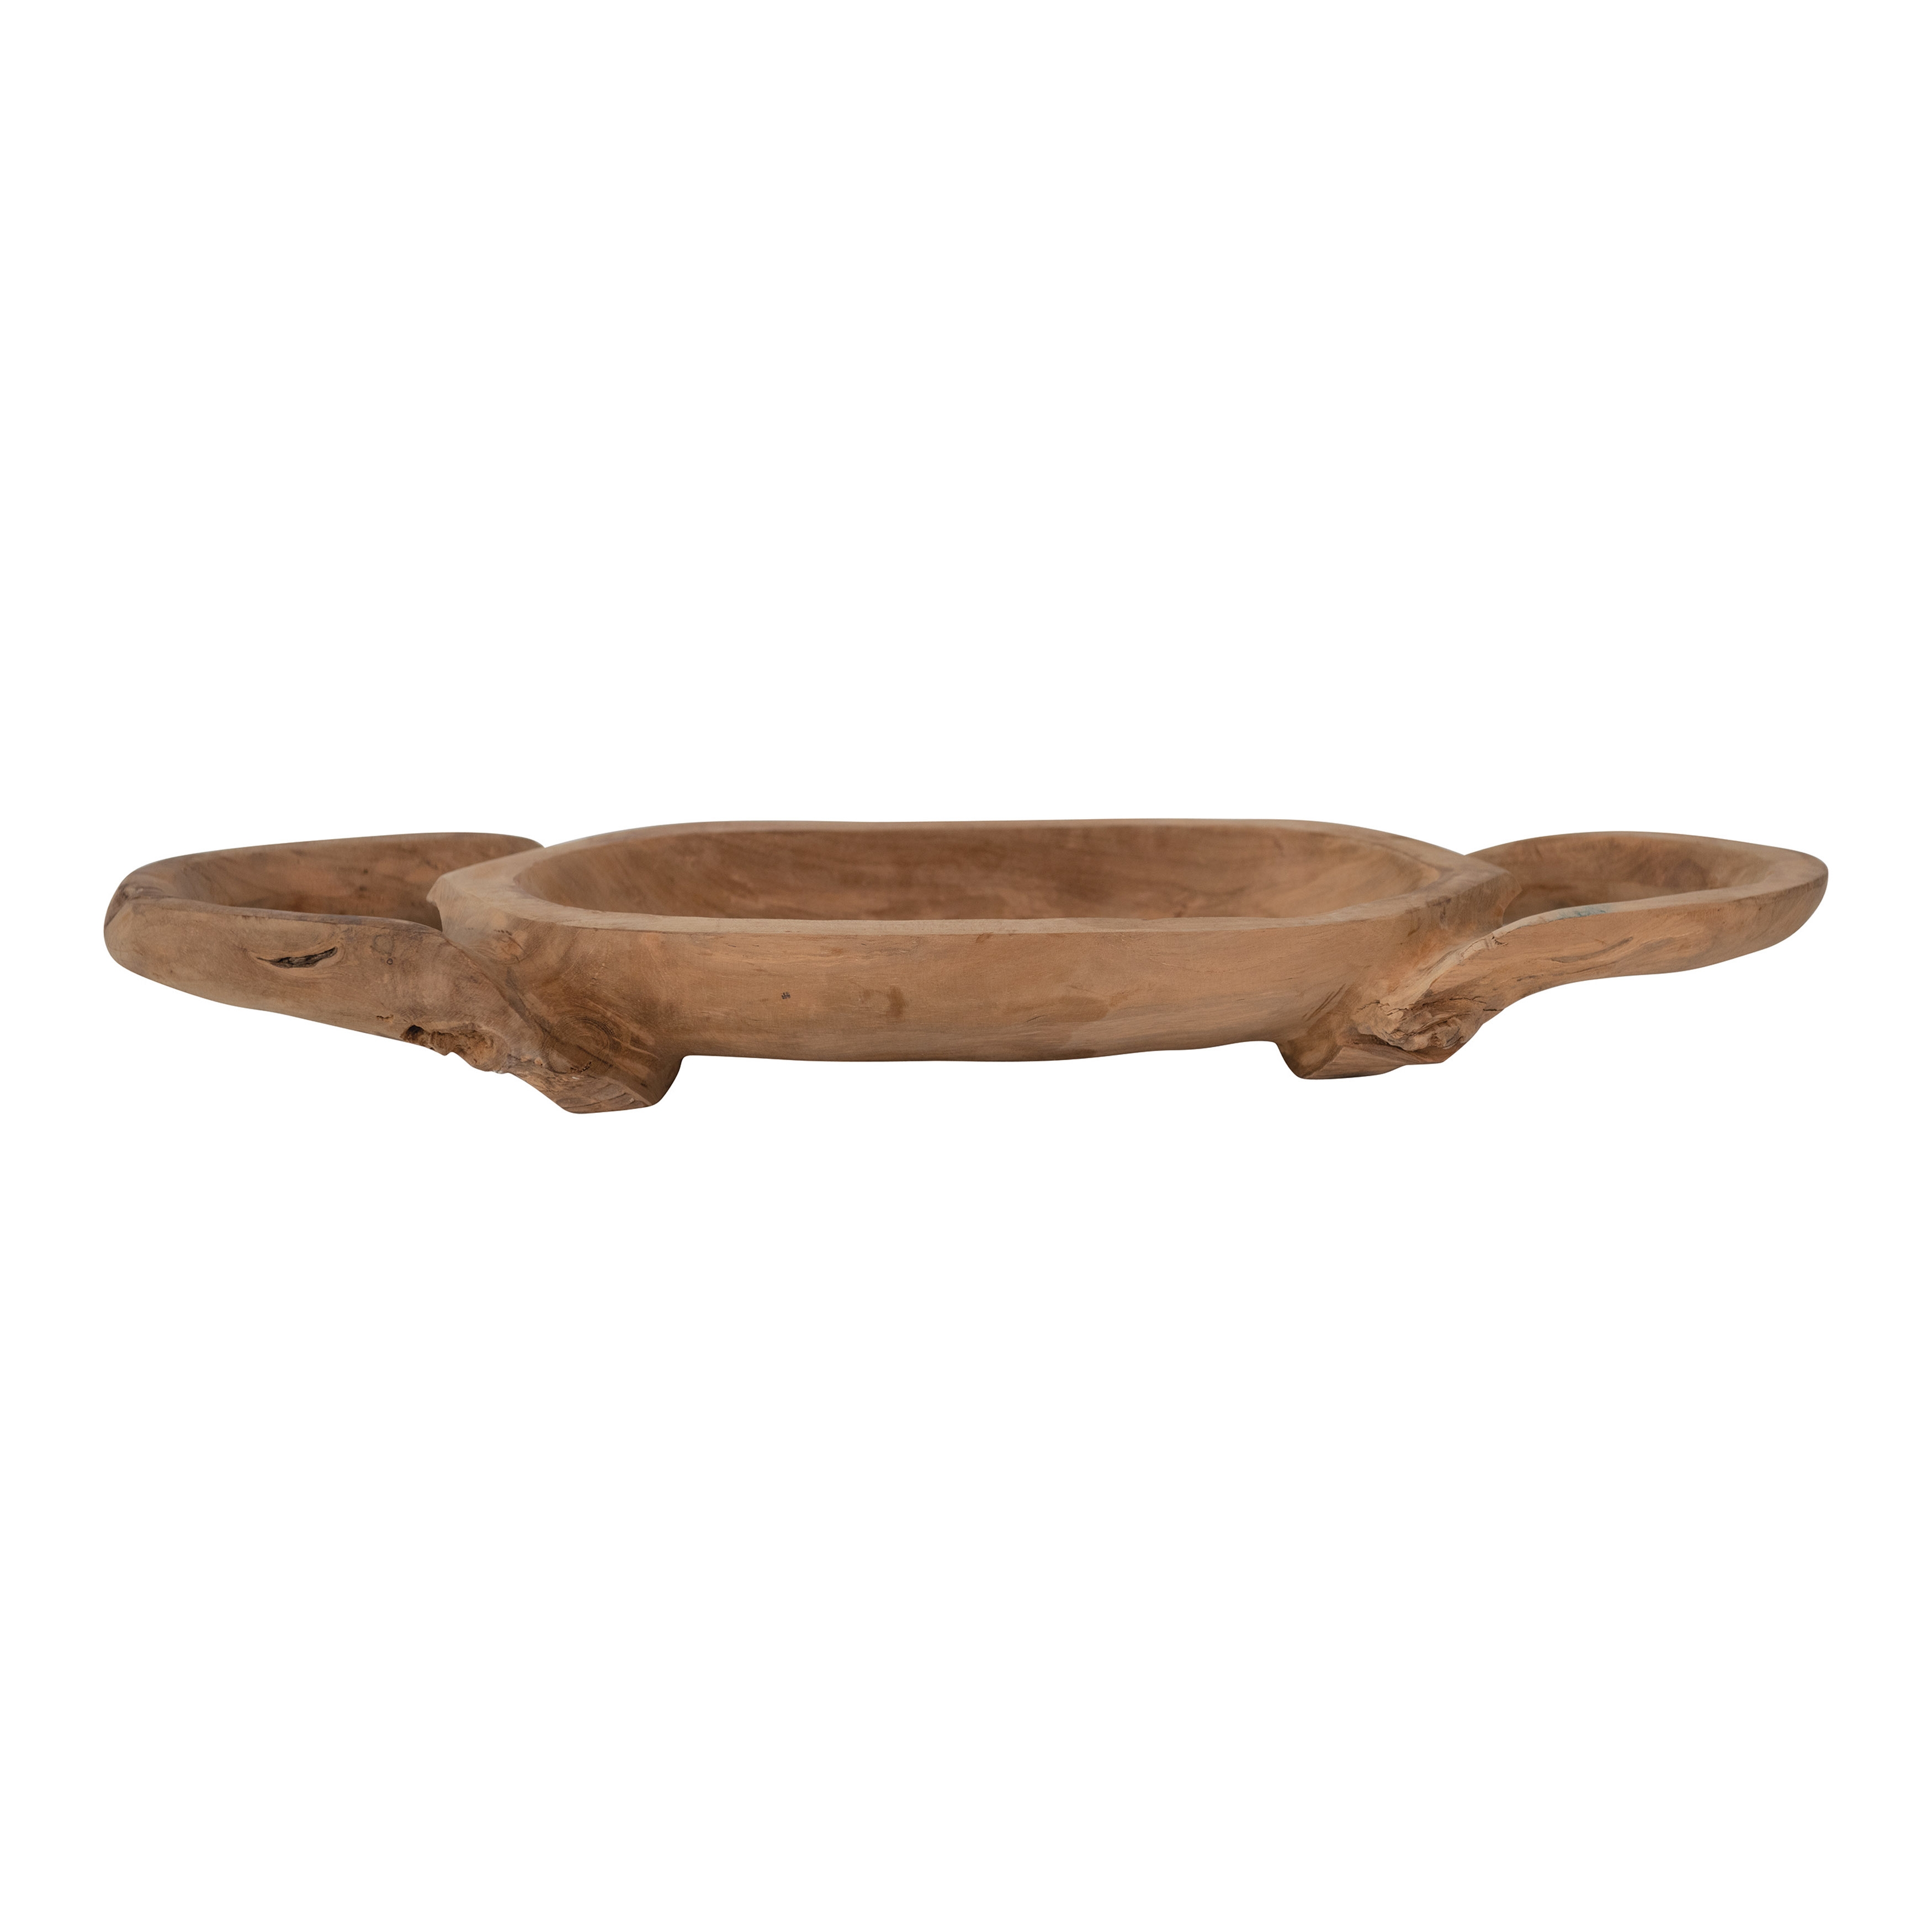 Abode Teak Tray with Handles - Image 0